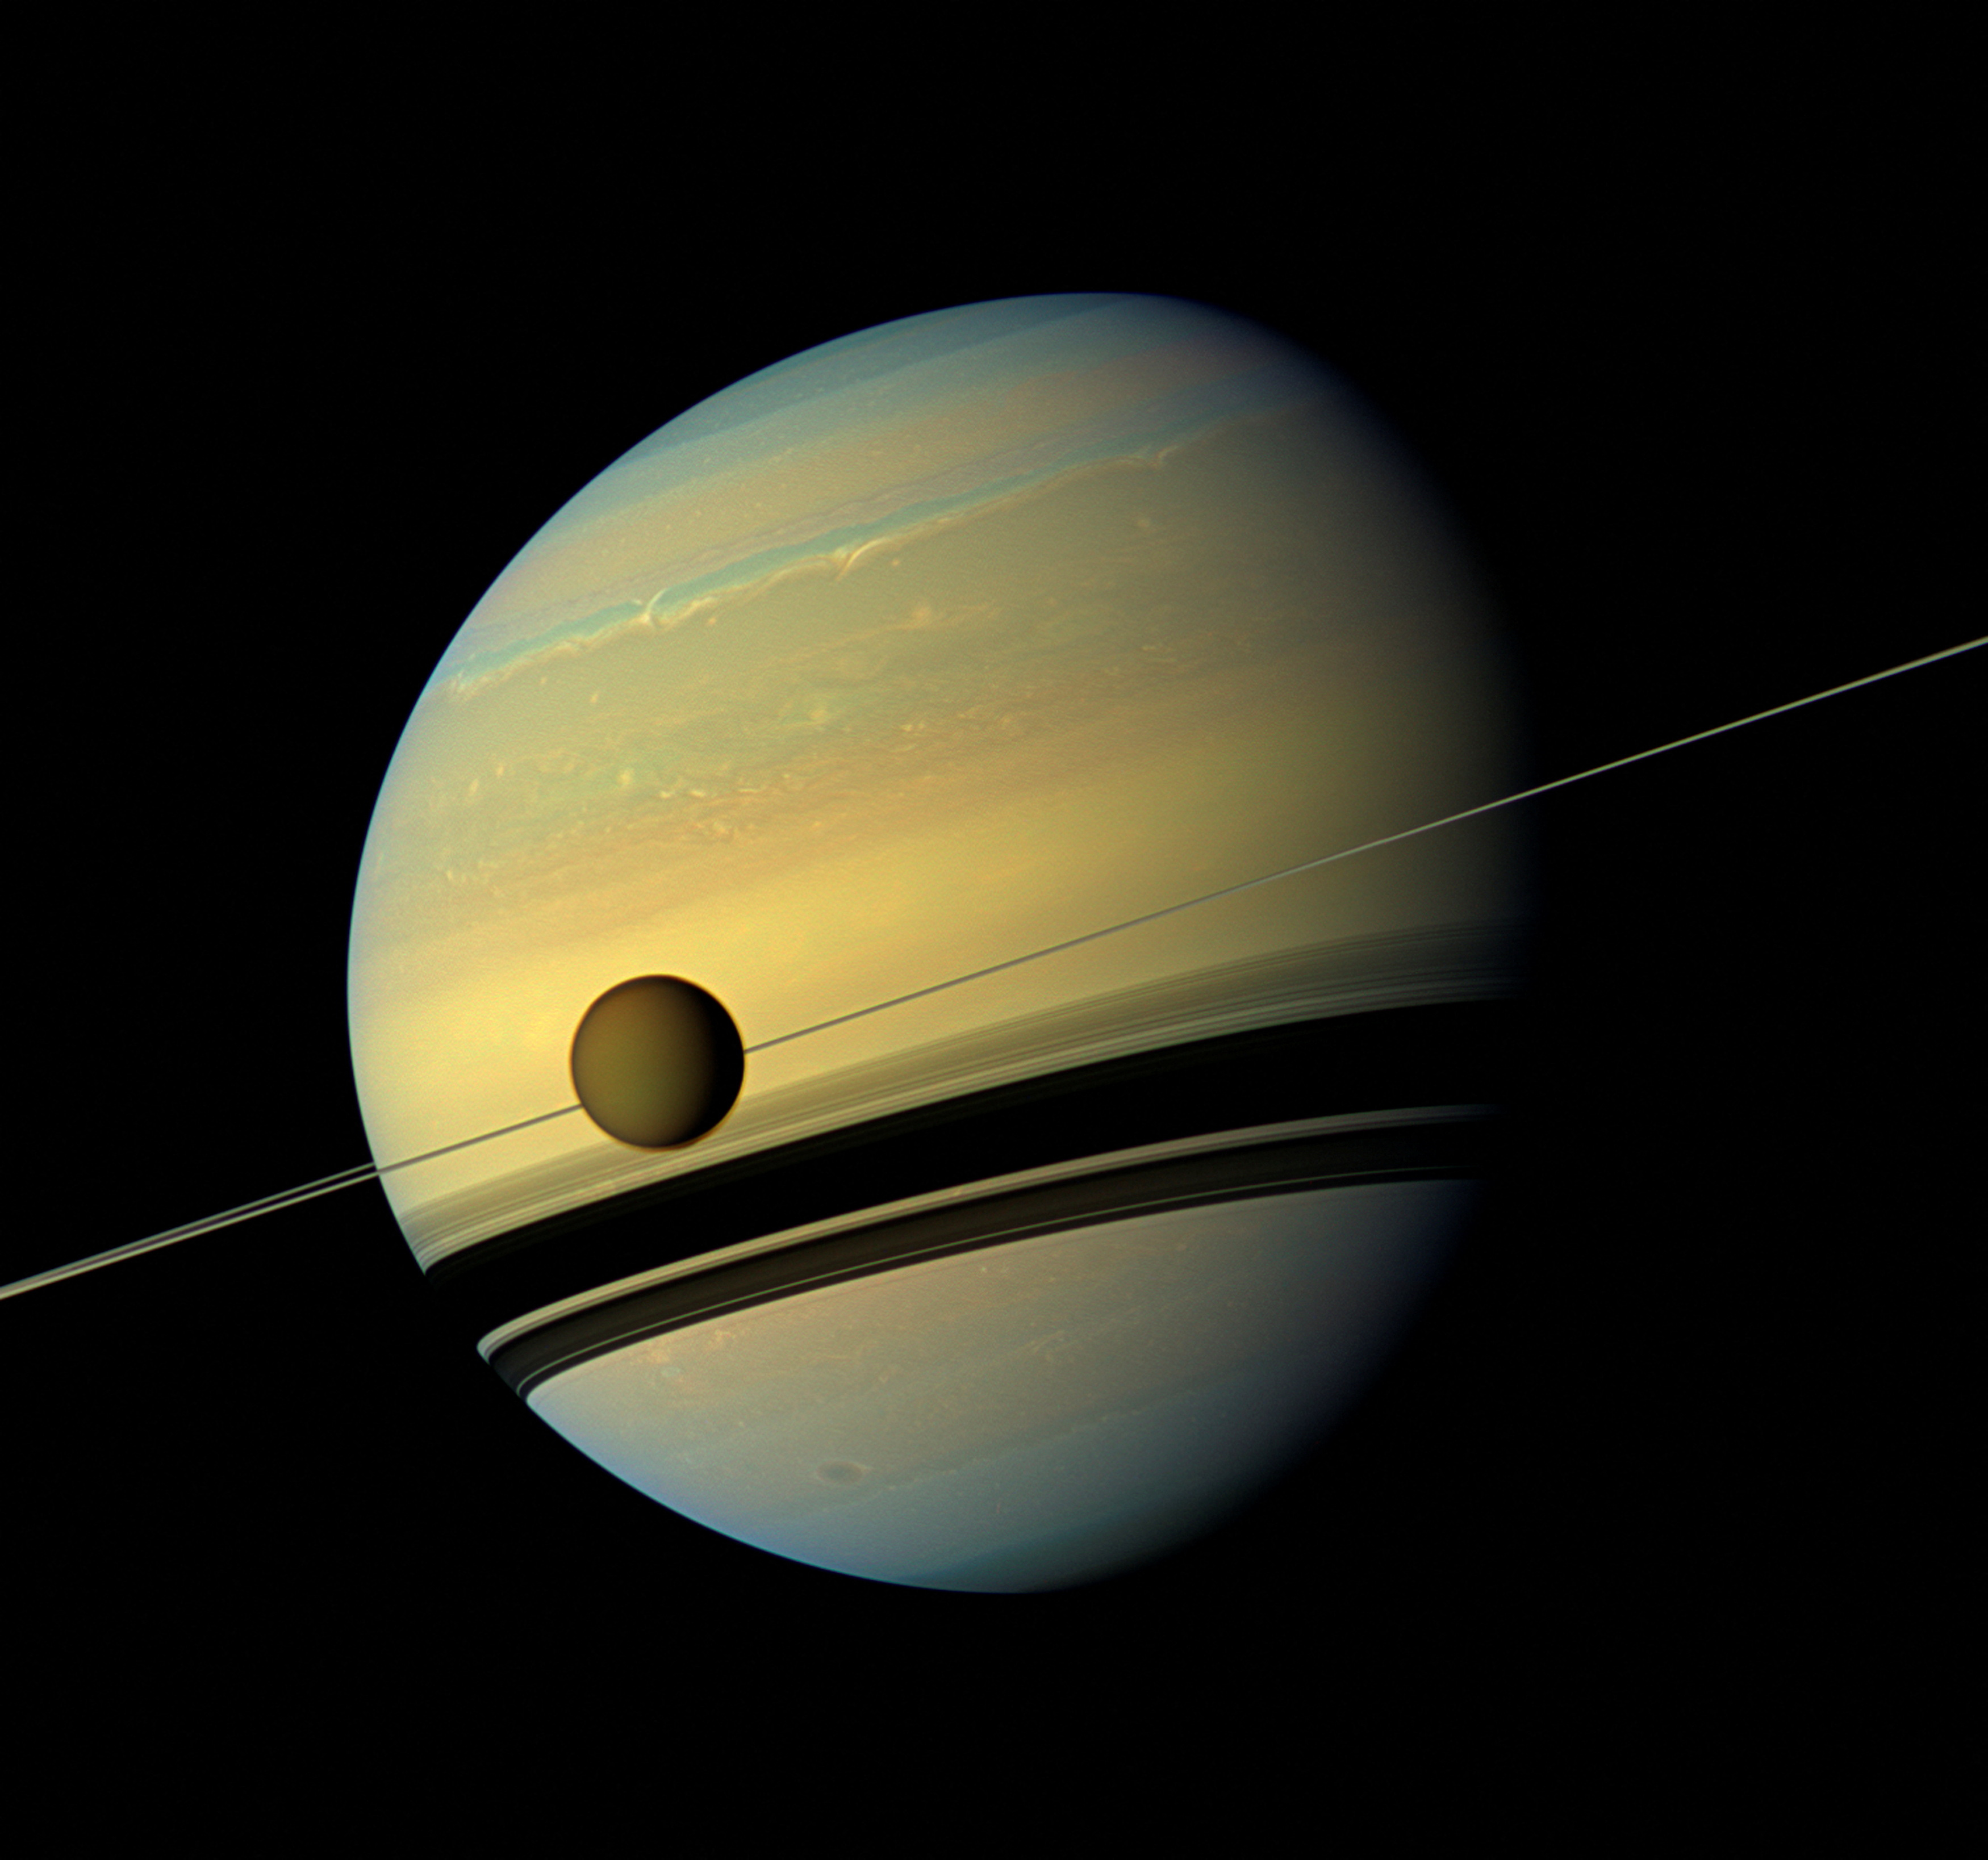 Handout of Titan, Saturn's largest moon in this natural color view from NASA's Cassini spacecraft